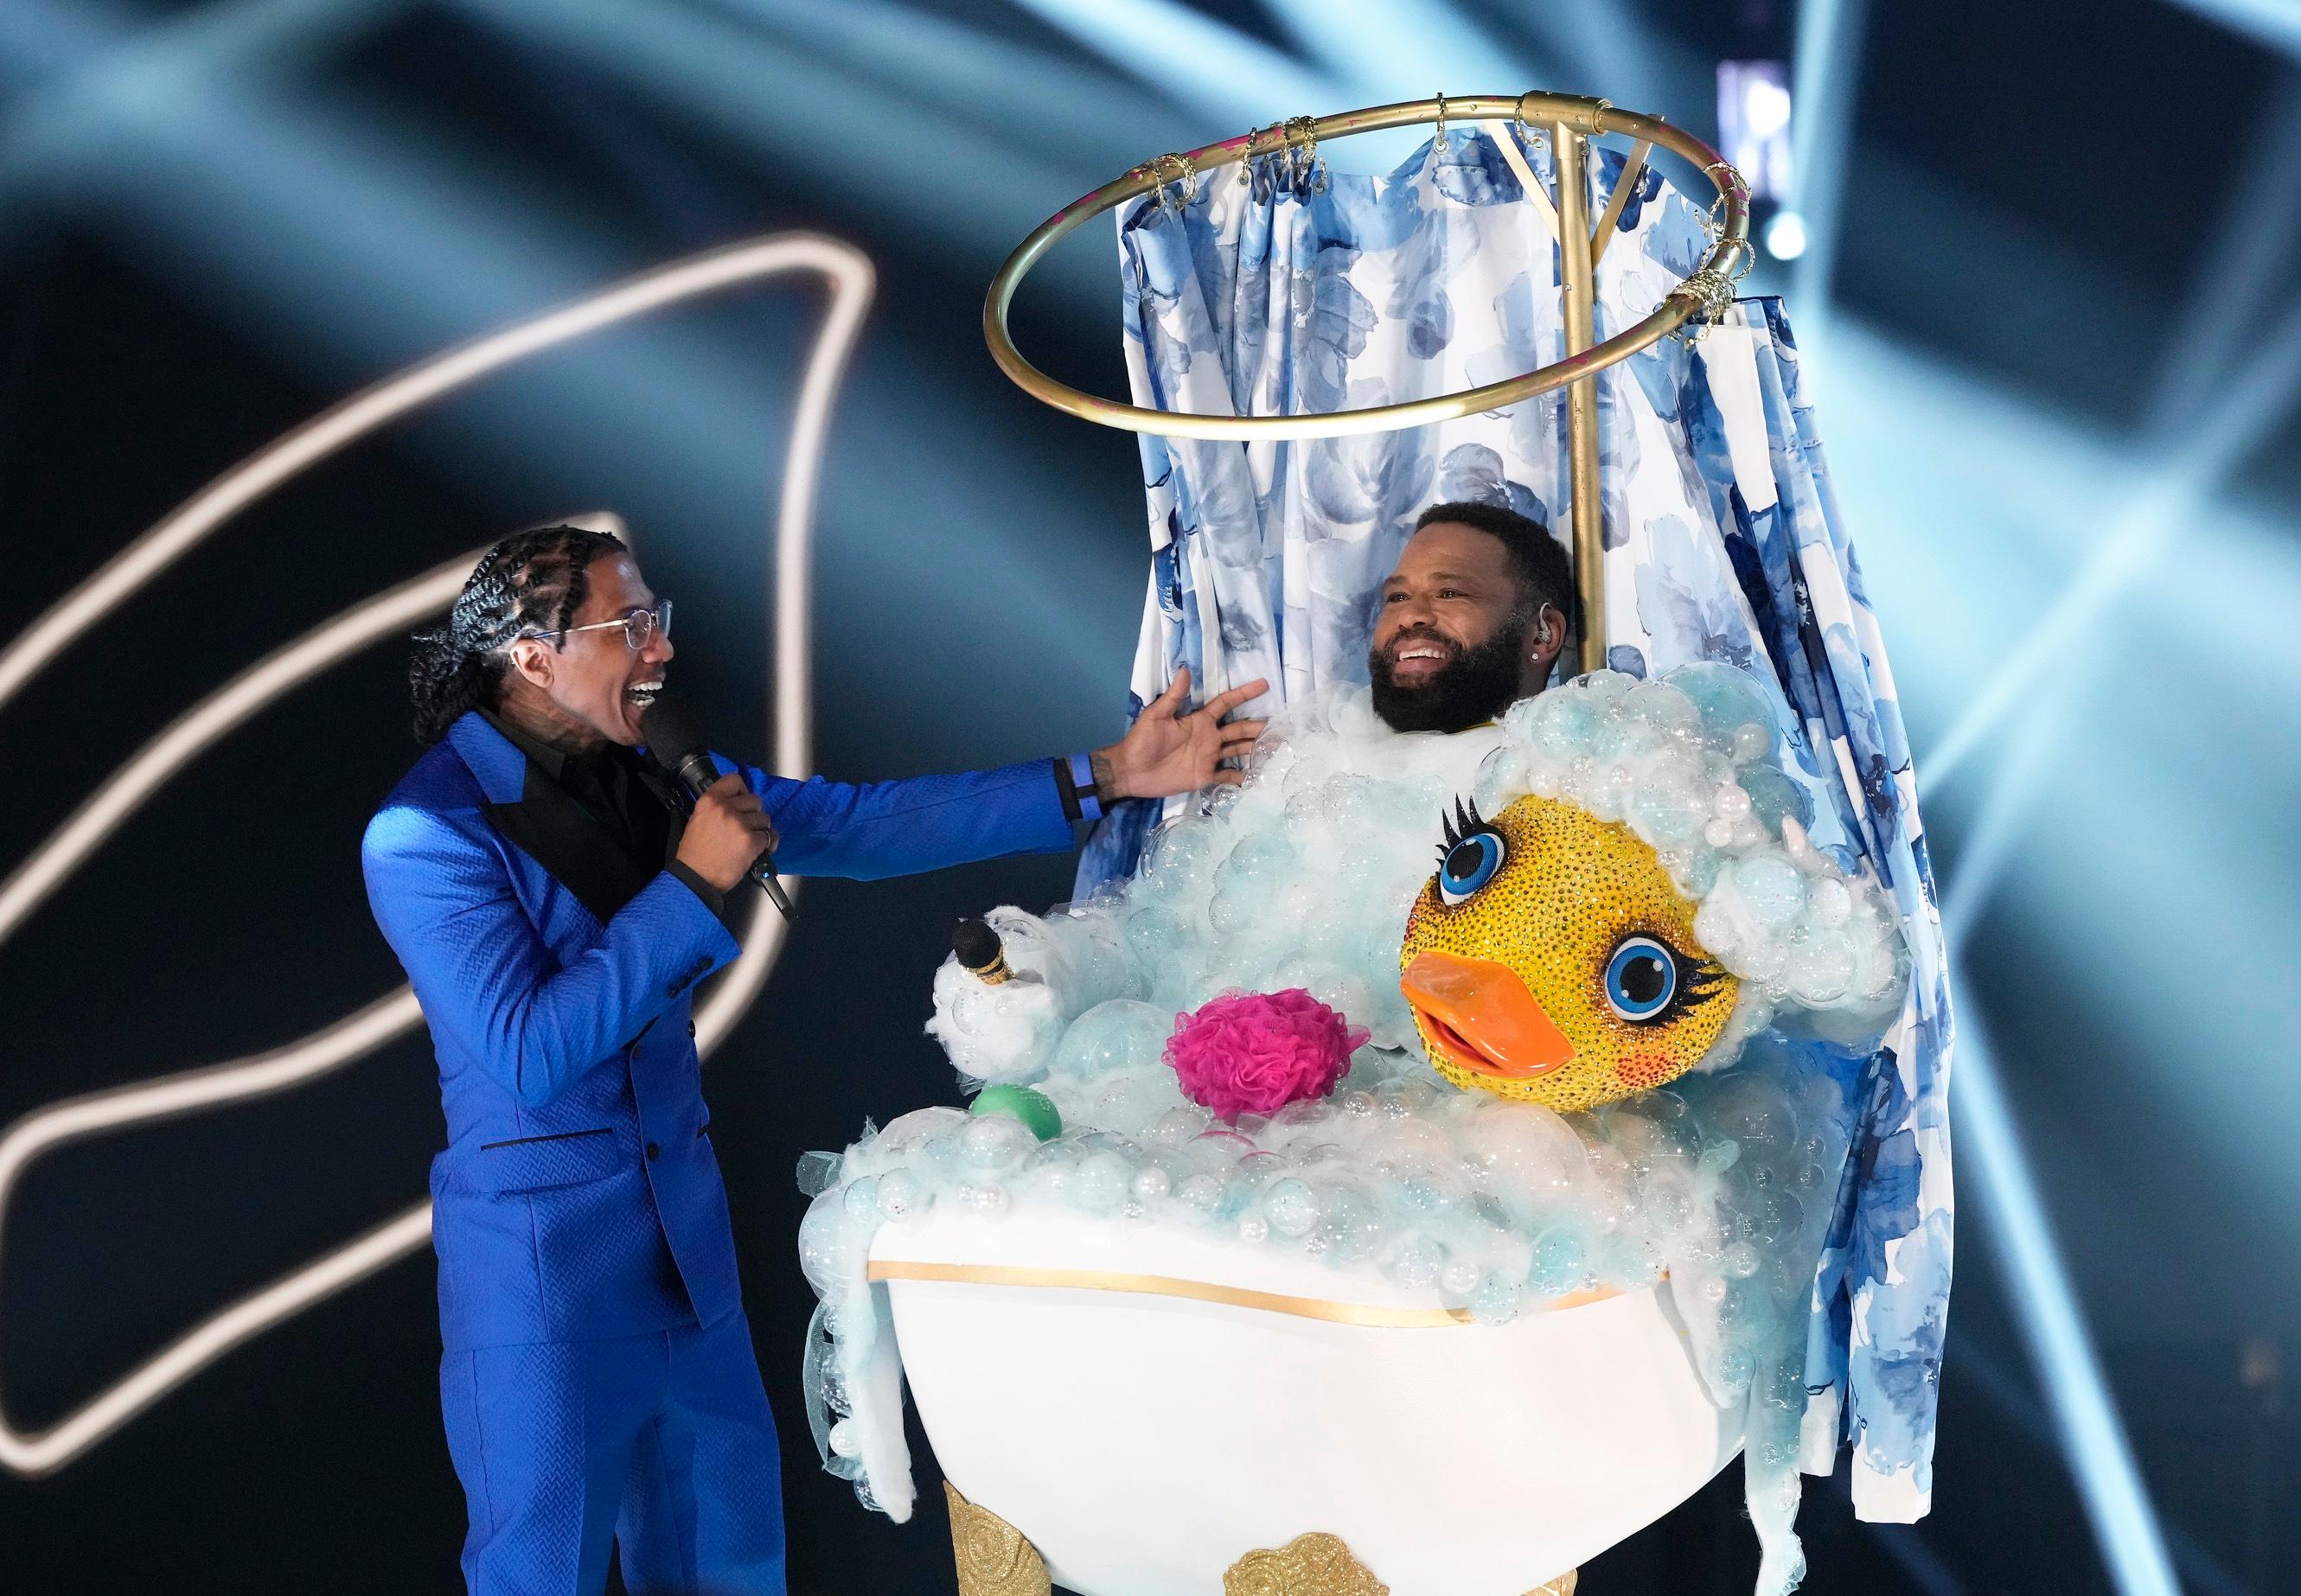 Season 10 premiere of 'The Masked Singer' reveals Anthony Anderson as Rubber Ducky.